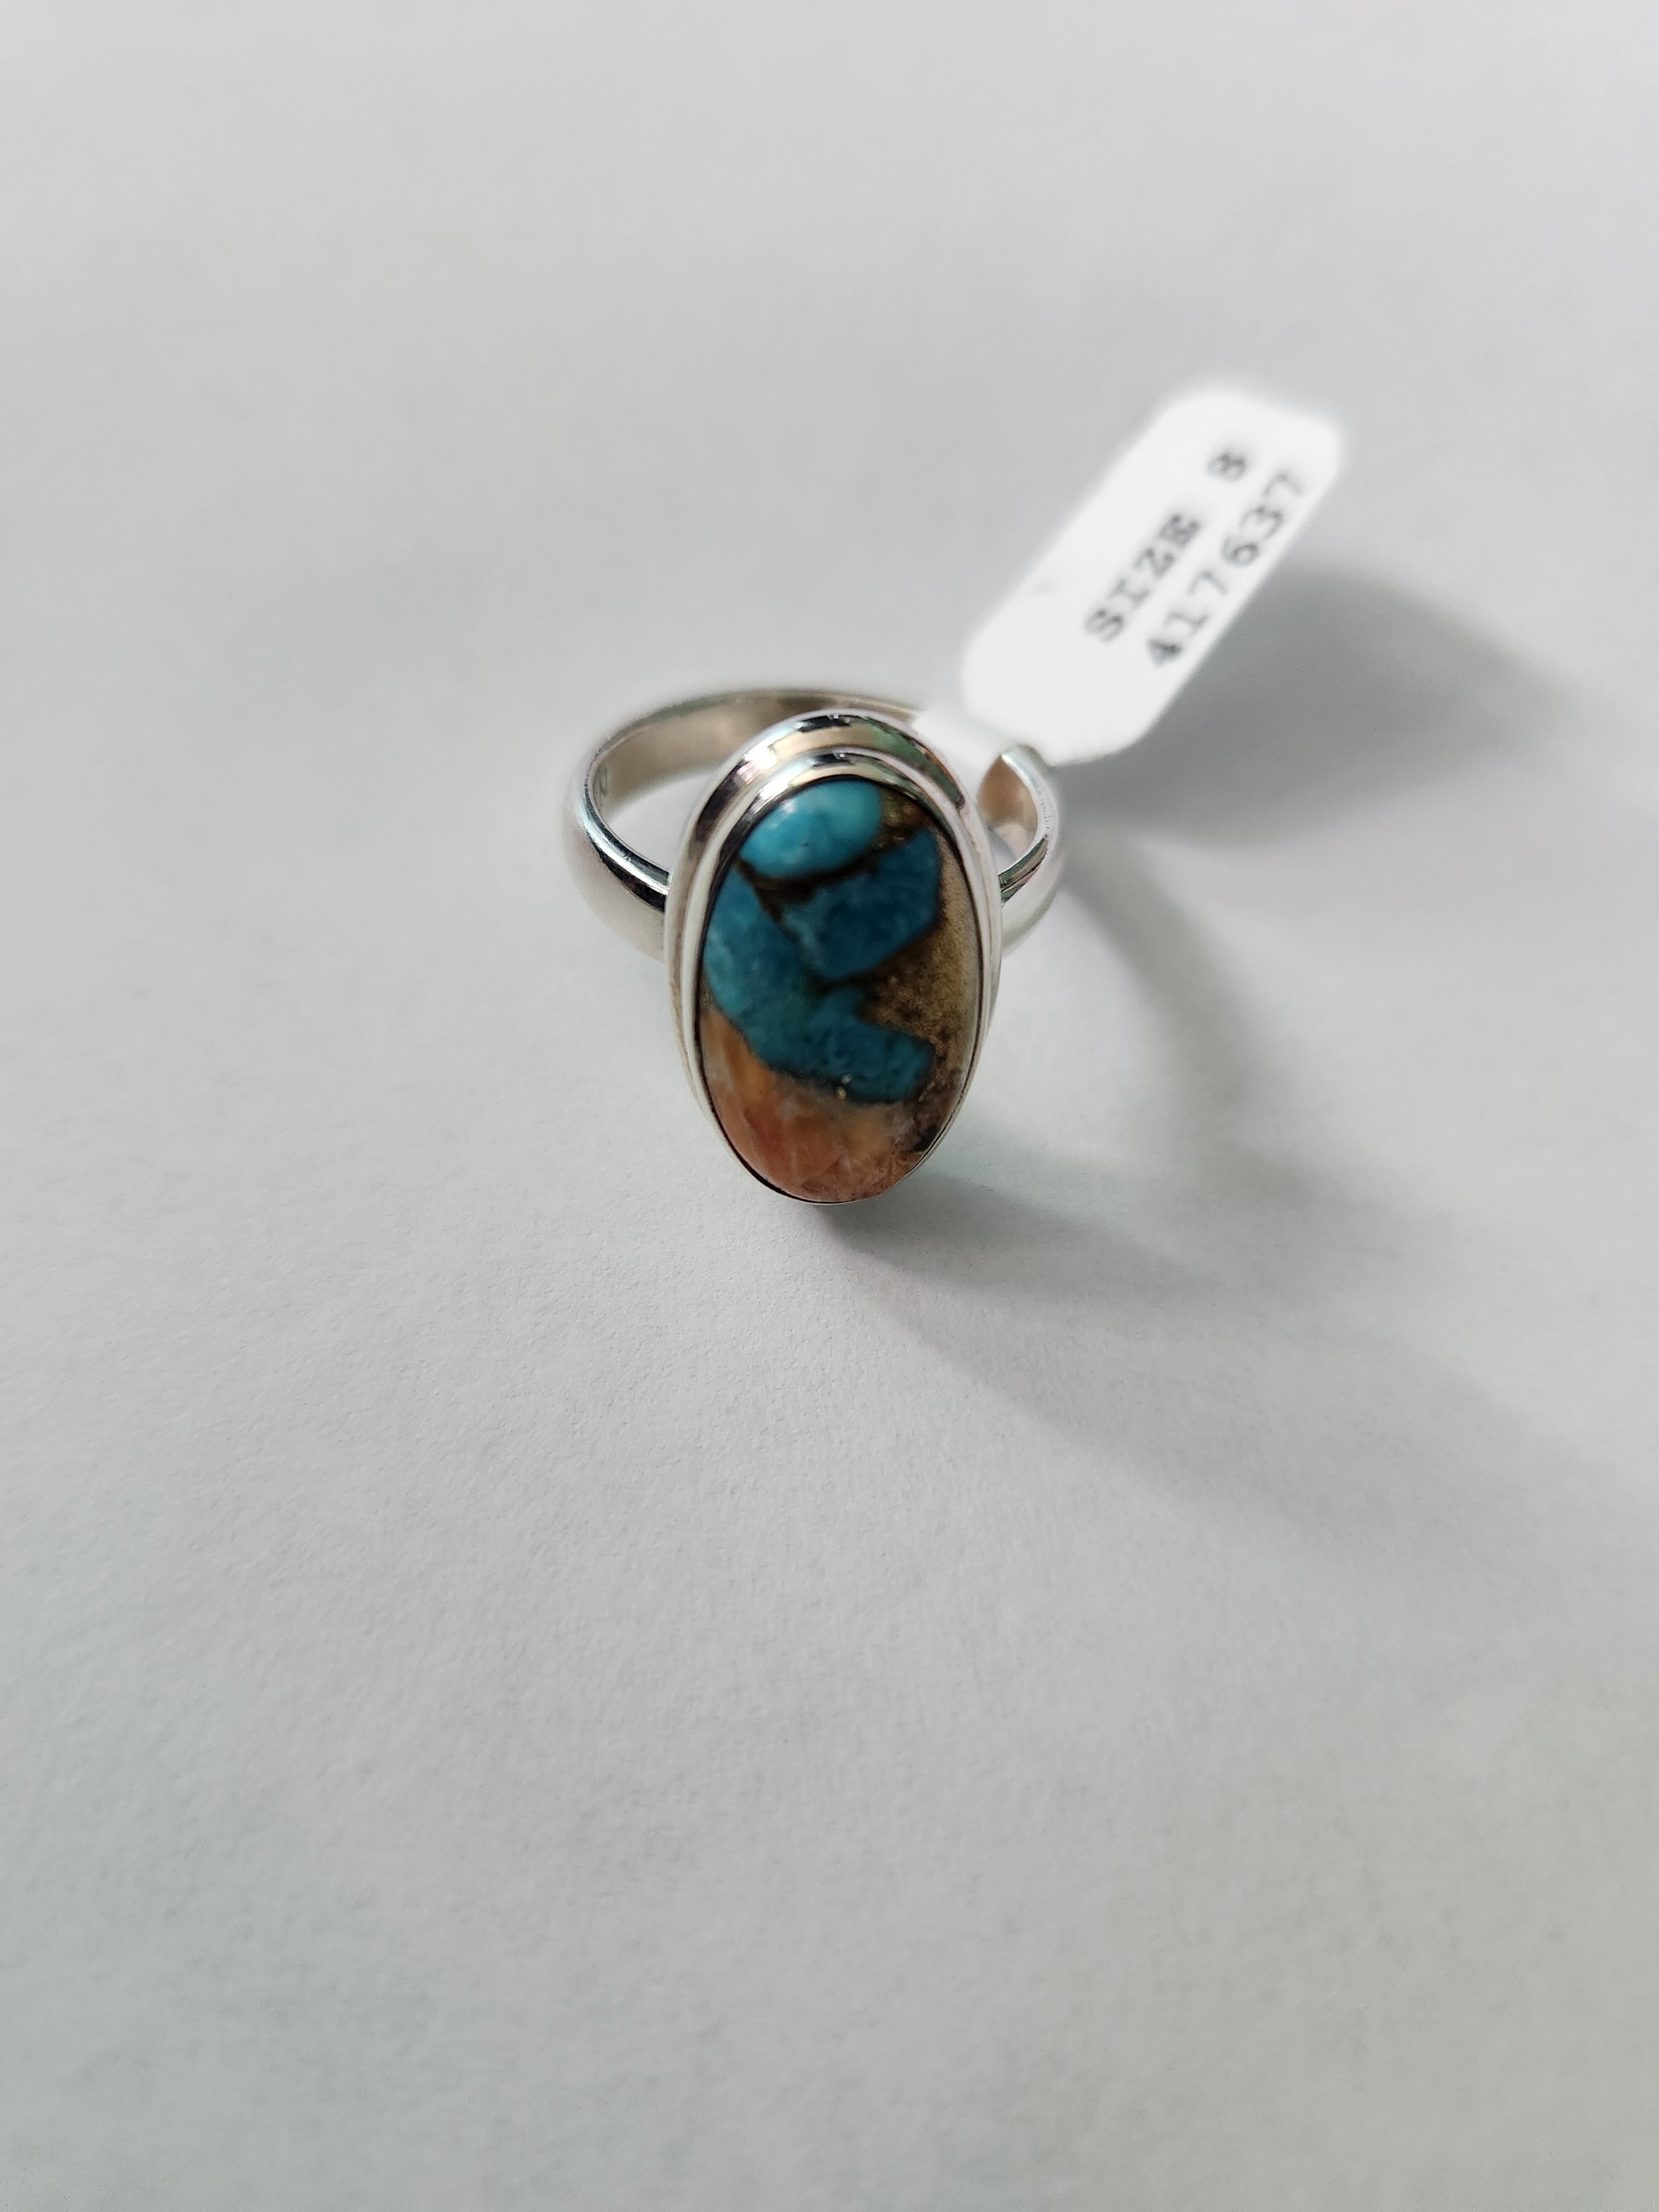 Handmade Sterling Silver Ring with Spiny Oyster Arizona Turquoise - Unique and Spiritual Jewelry for Women